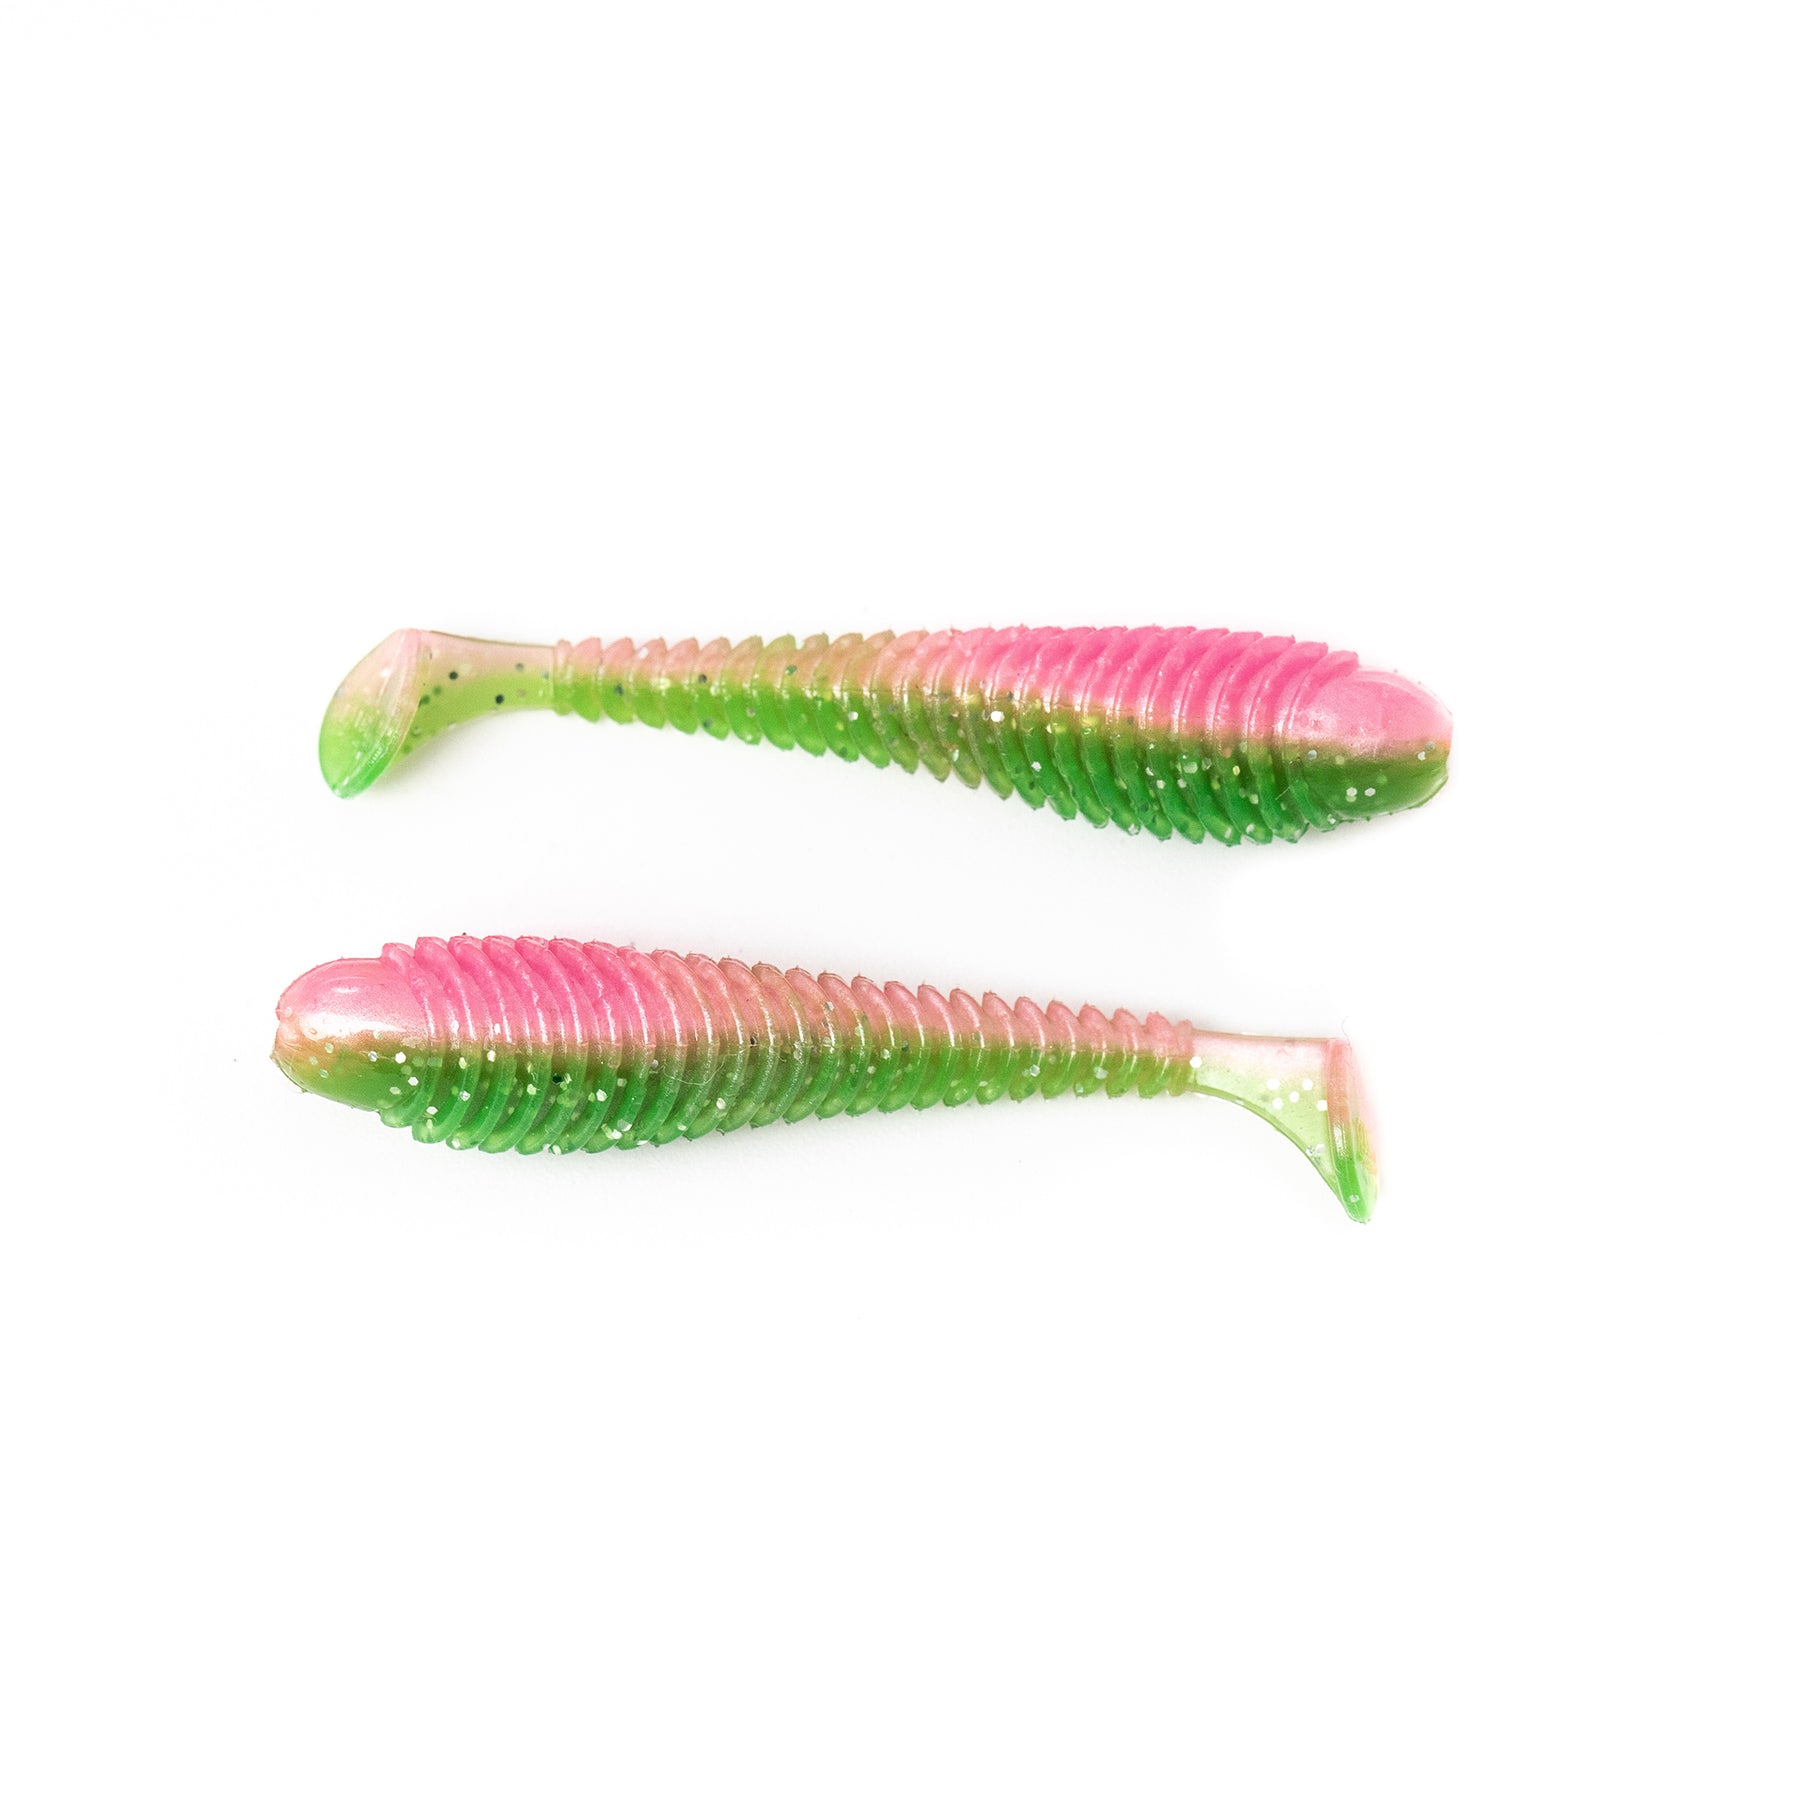 Googan Baits Saucy Swimmer Paddle Tail Shad 3.3, 3.8, And 4.8 inch Fishing  Lure